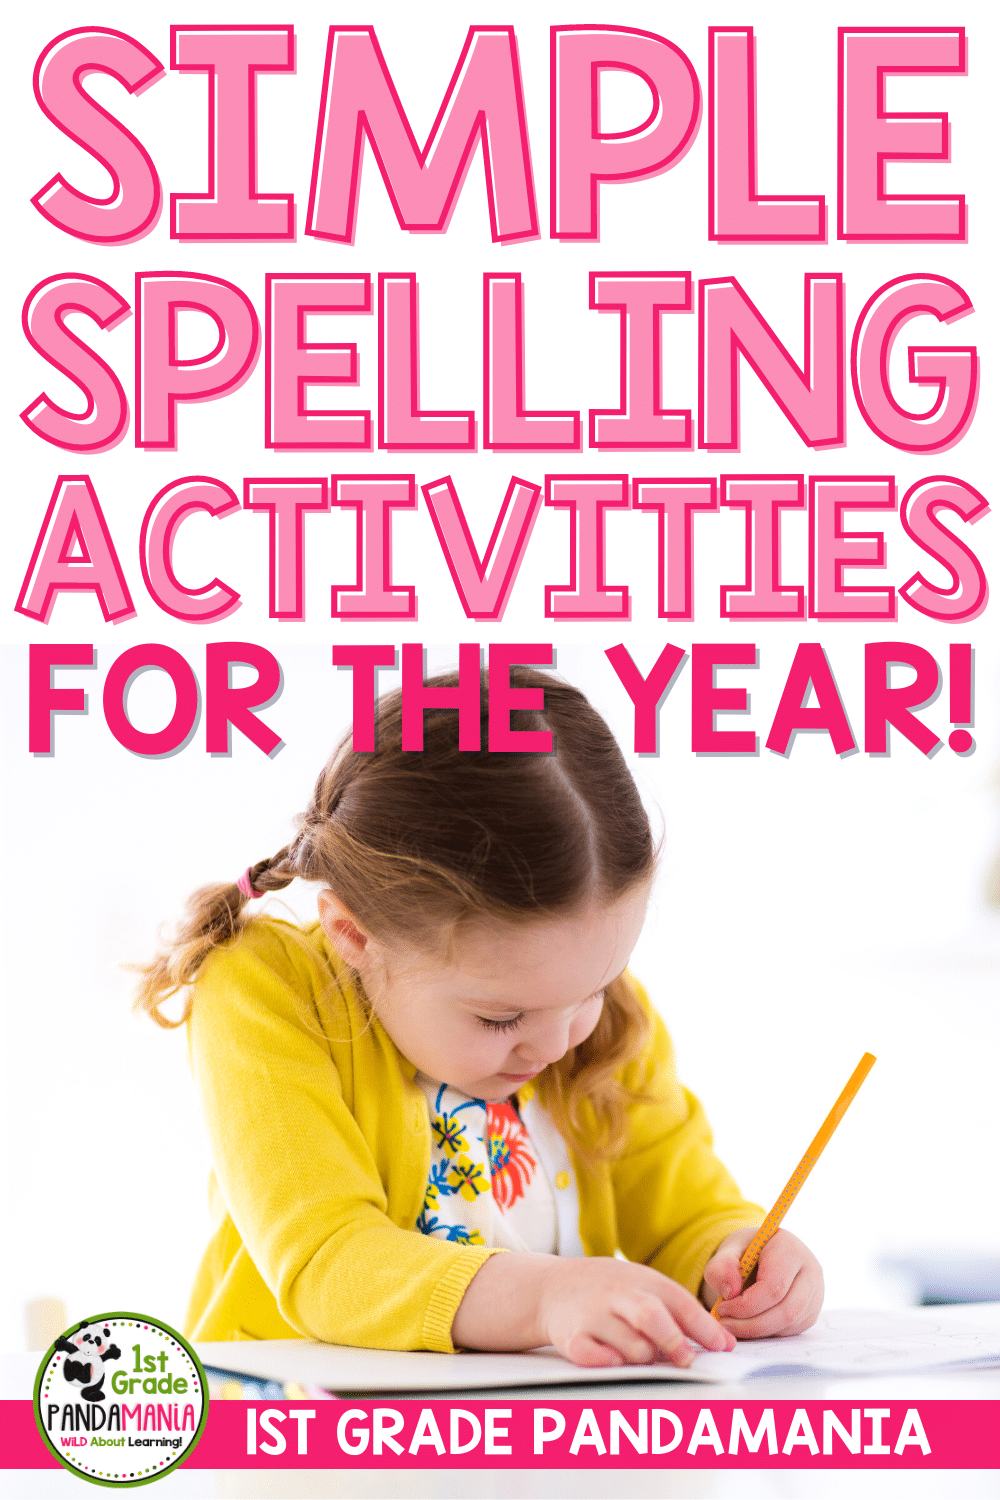 EASY Spelling Activities For The YEAR! | 1st Grade Pandamania